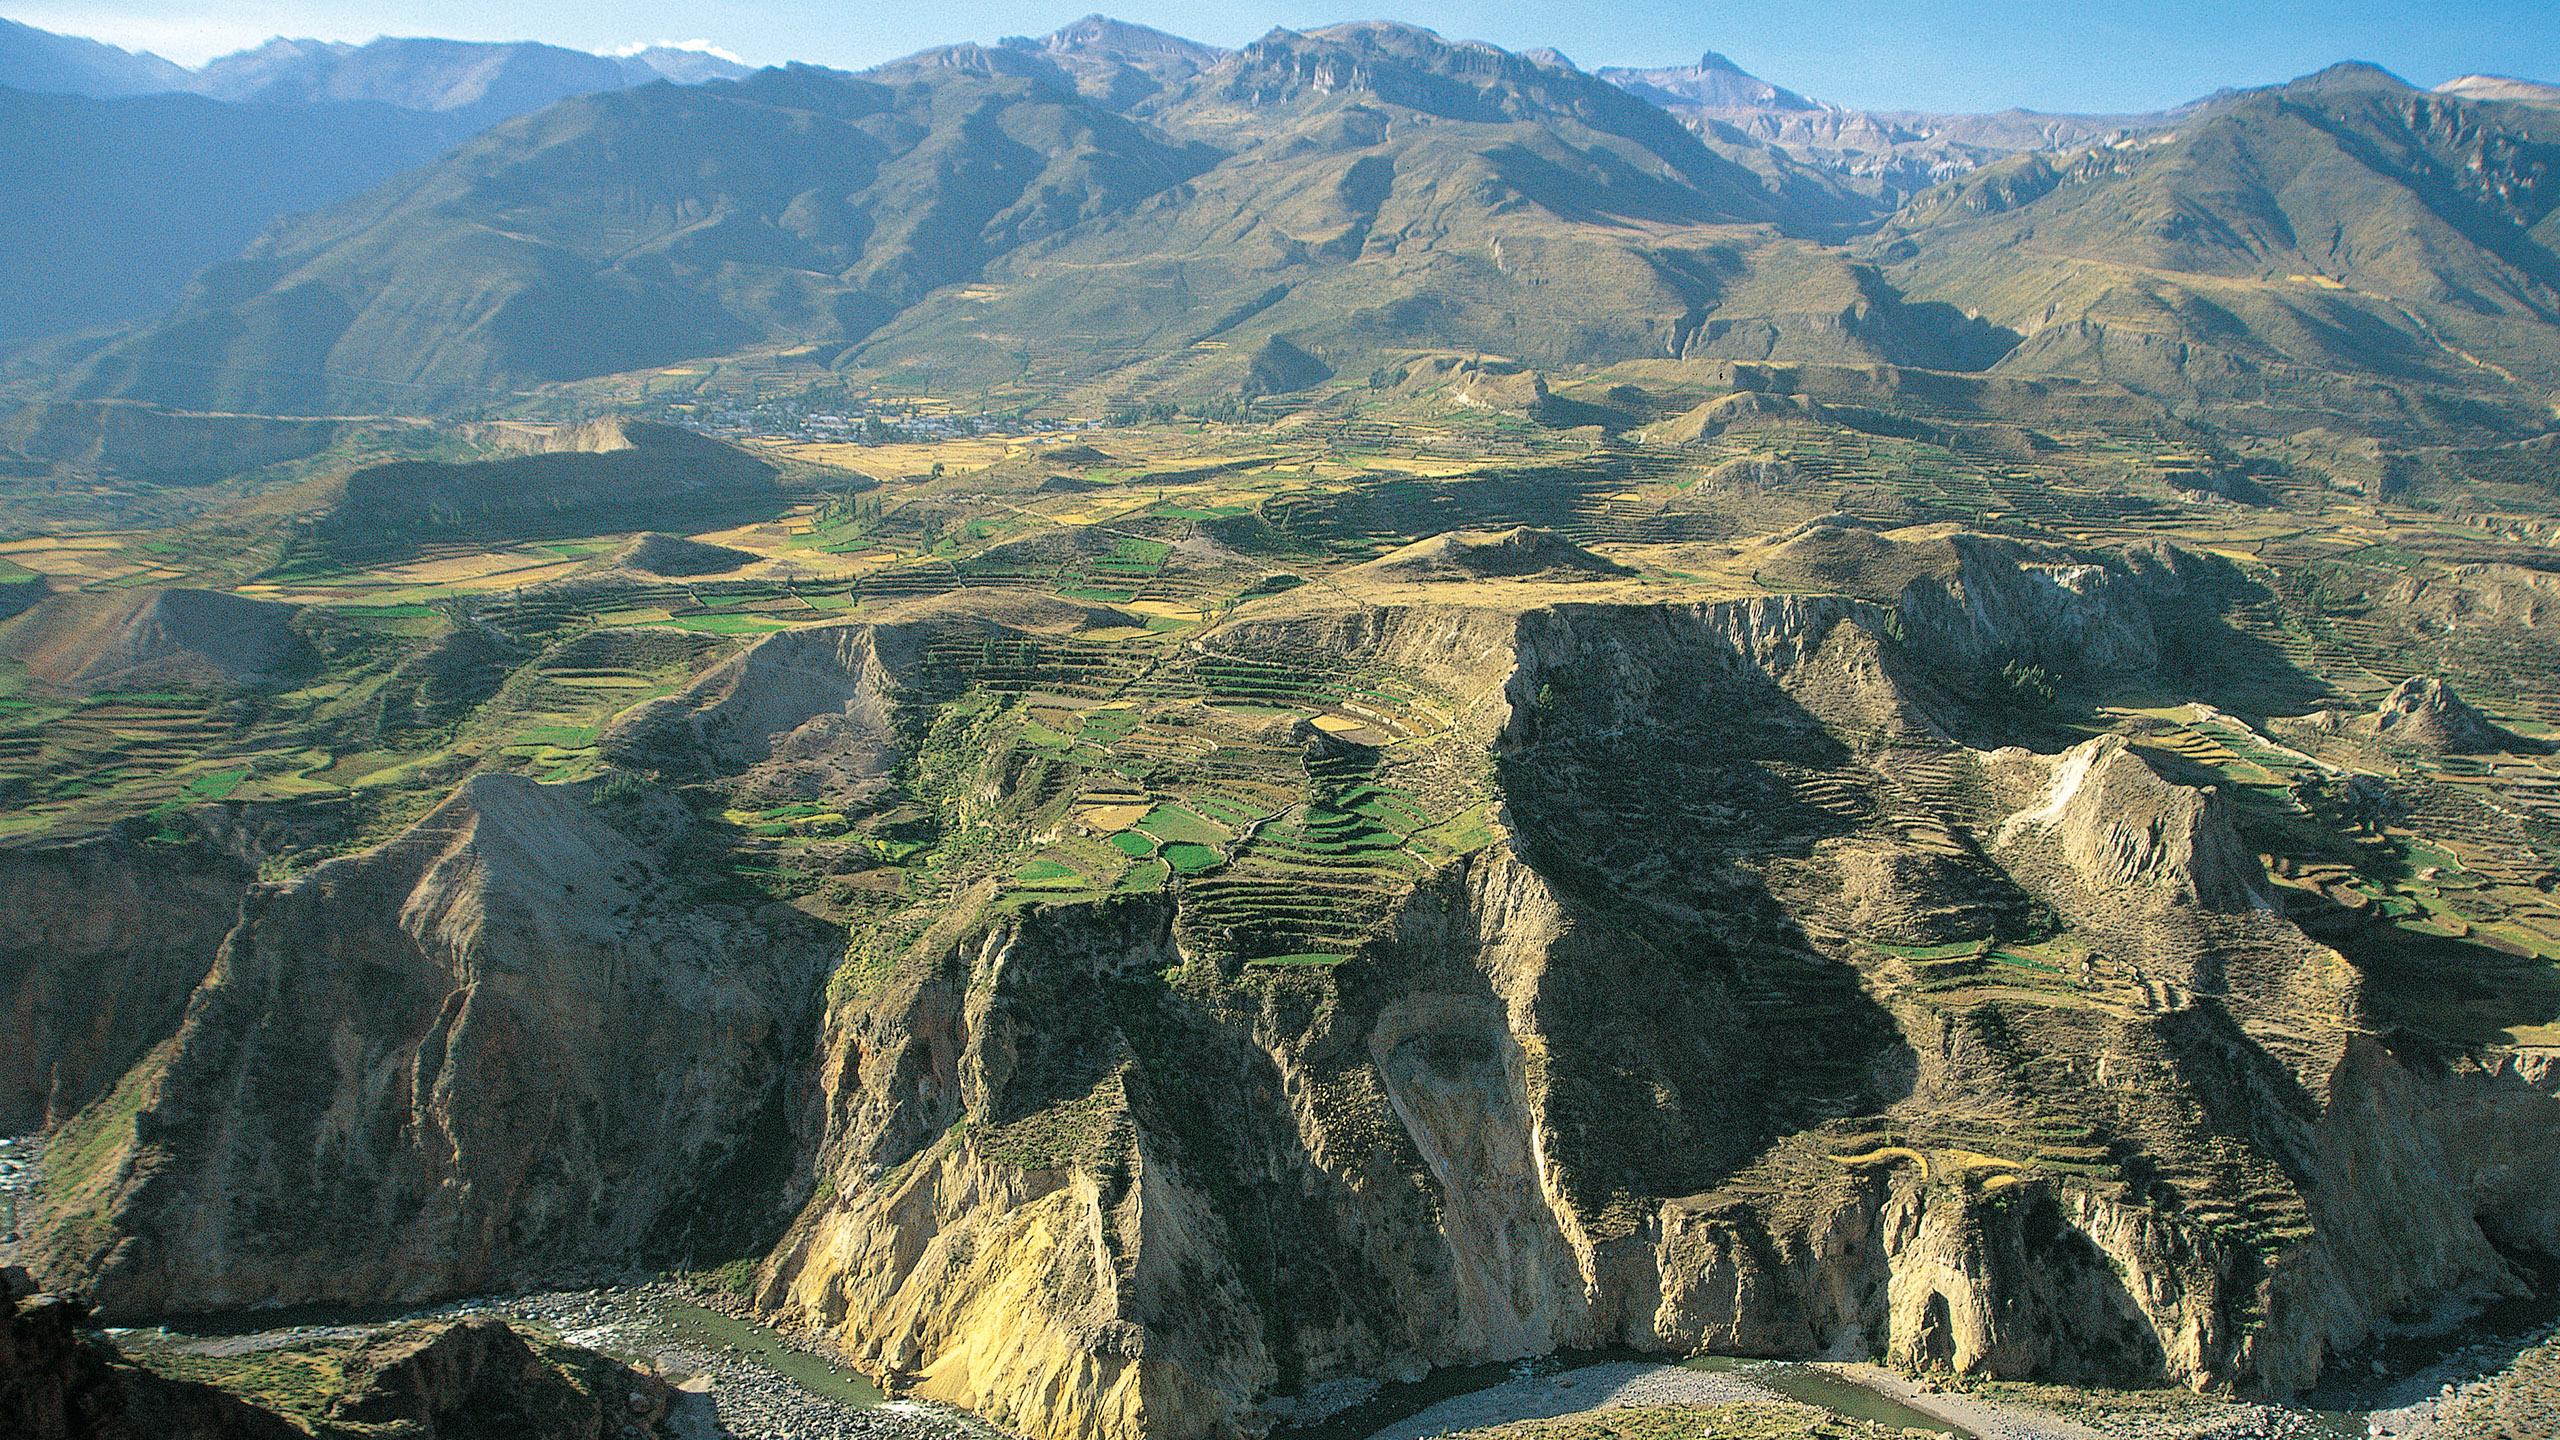 Book Arequipa & the Colca Canyon holidays 2020. Abercrombie